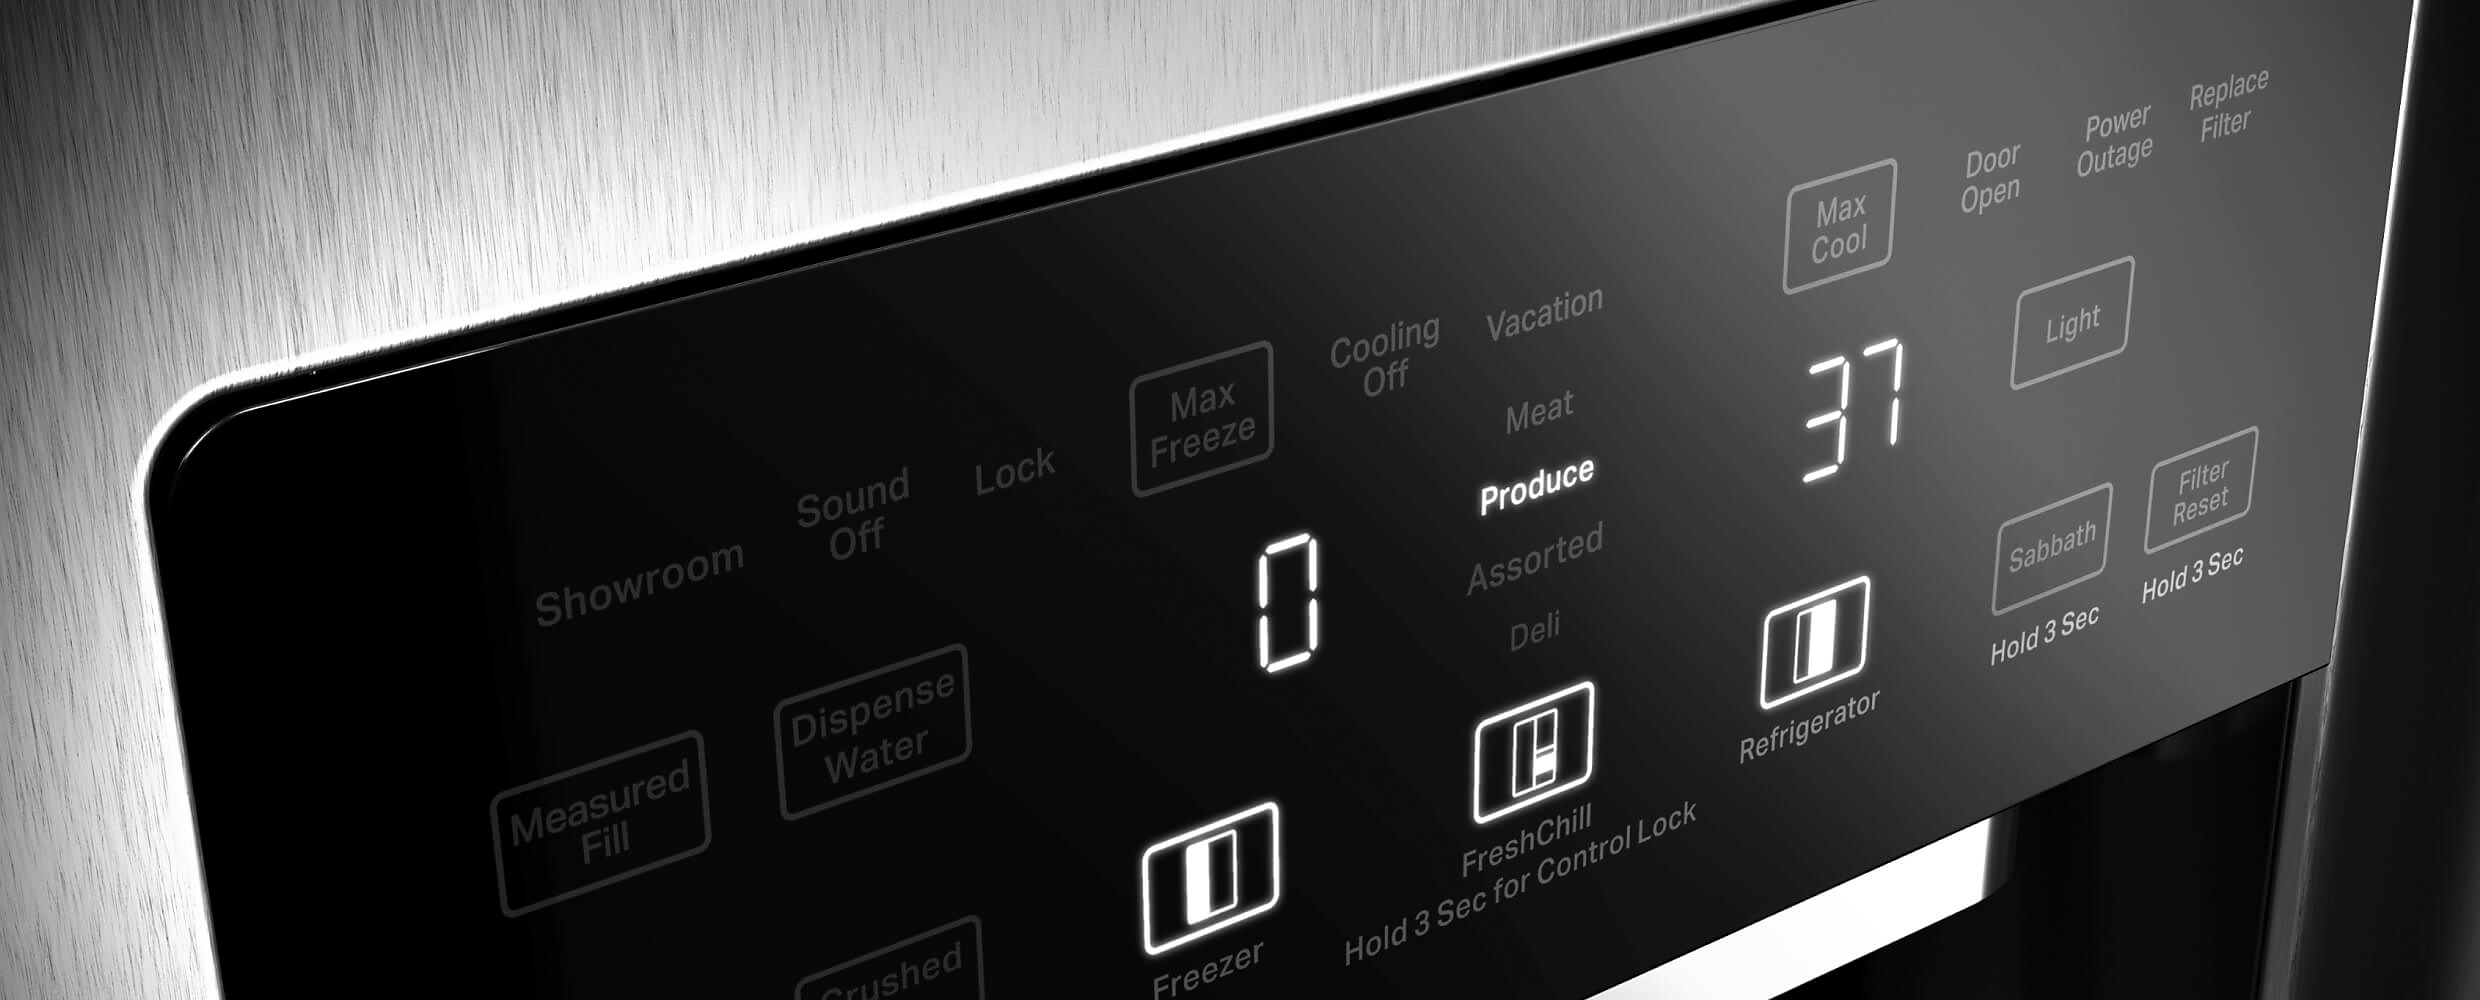 External Touchscreen Controls on the 42" KitchenAid® Built-In Side-by-Side Refrigerator